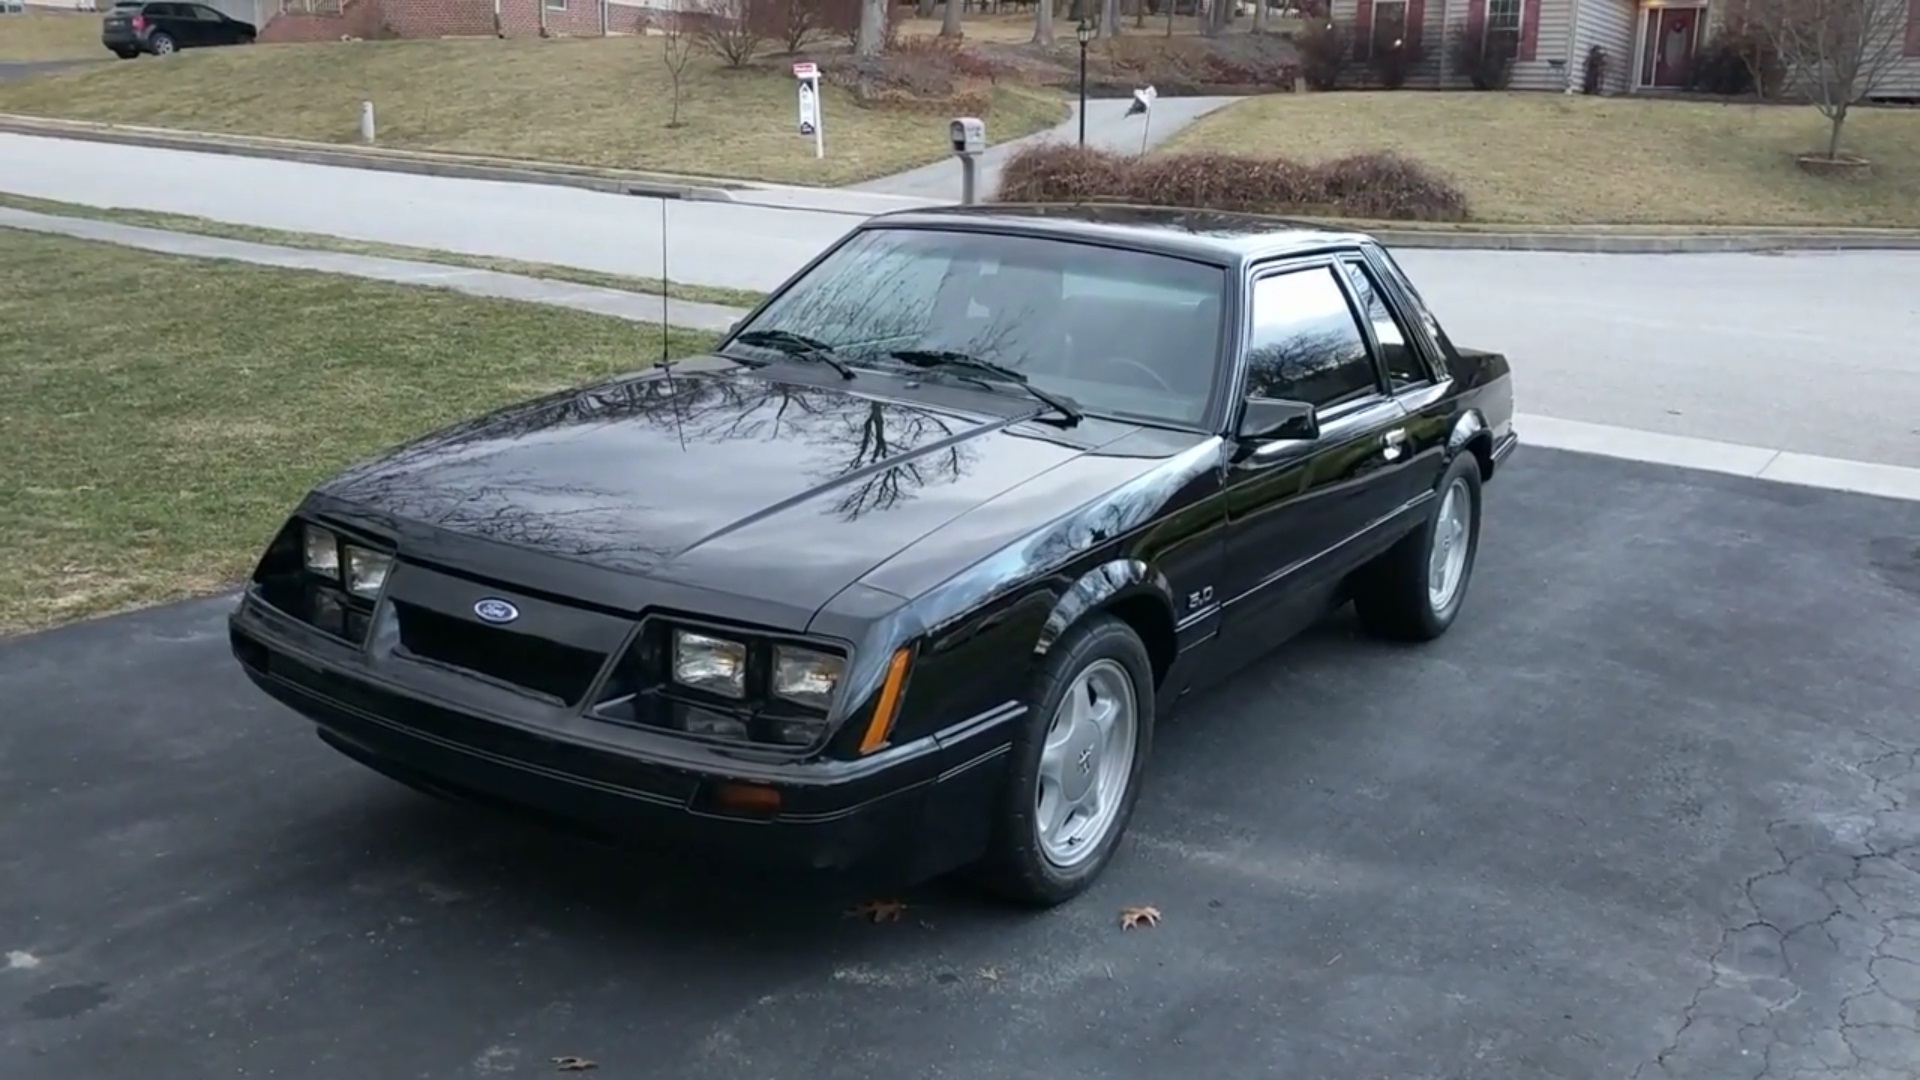 Video: 1985 Ford Mustang LX 5.0 Coupe Walkaround + Overview